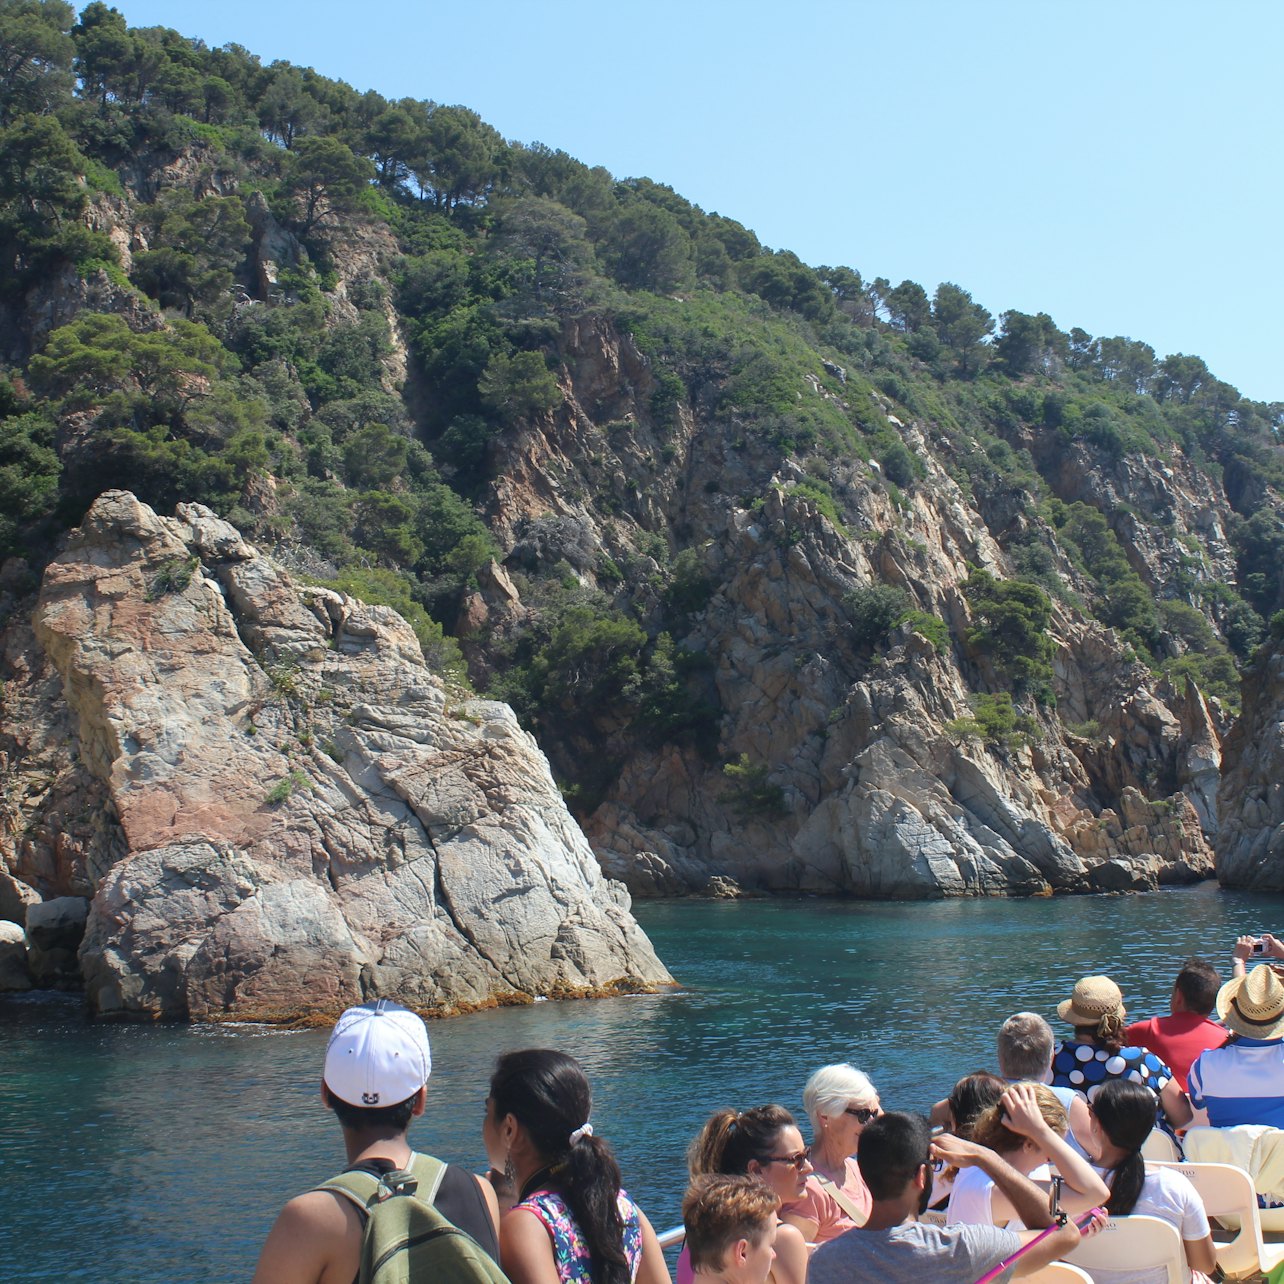 Tour from Barcelona to the Costa Brava with a Boat Ride - Accommodations in Barcelona